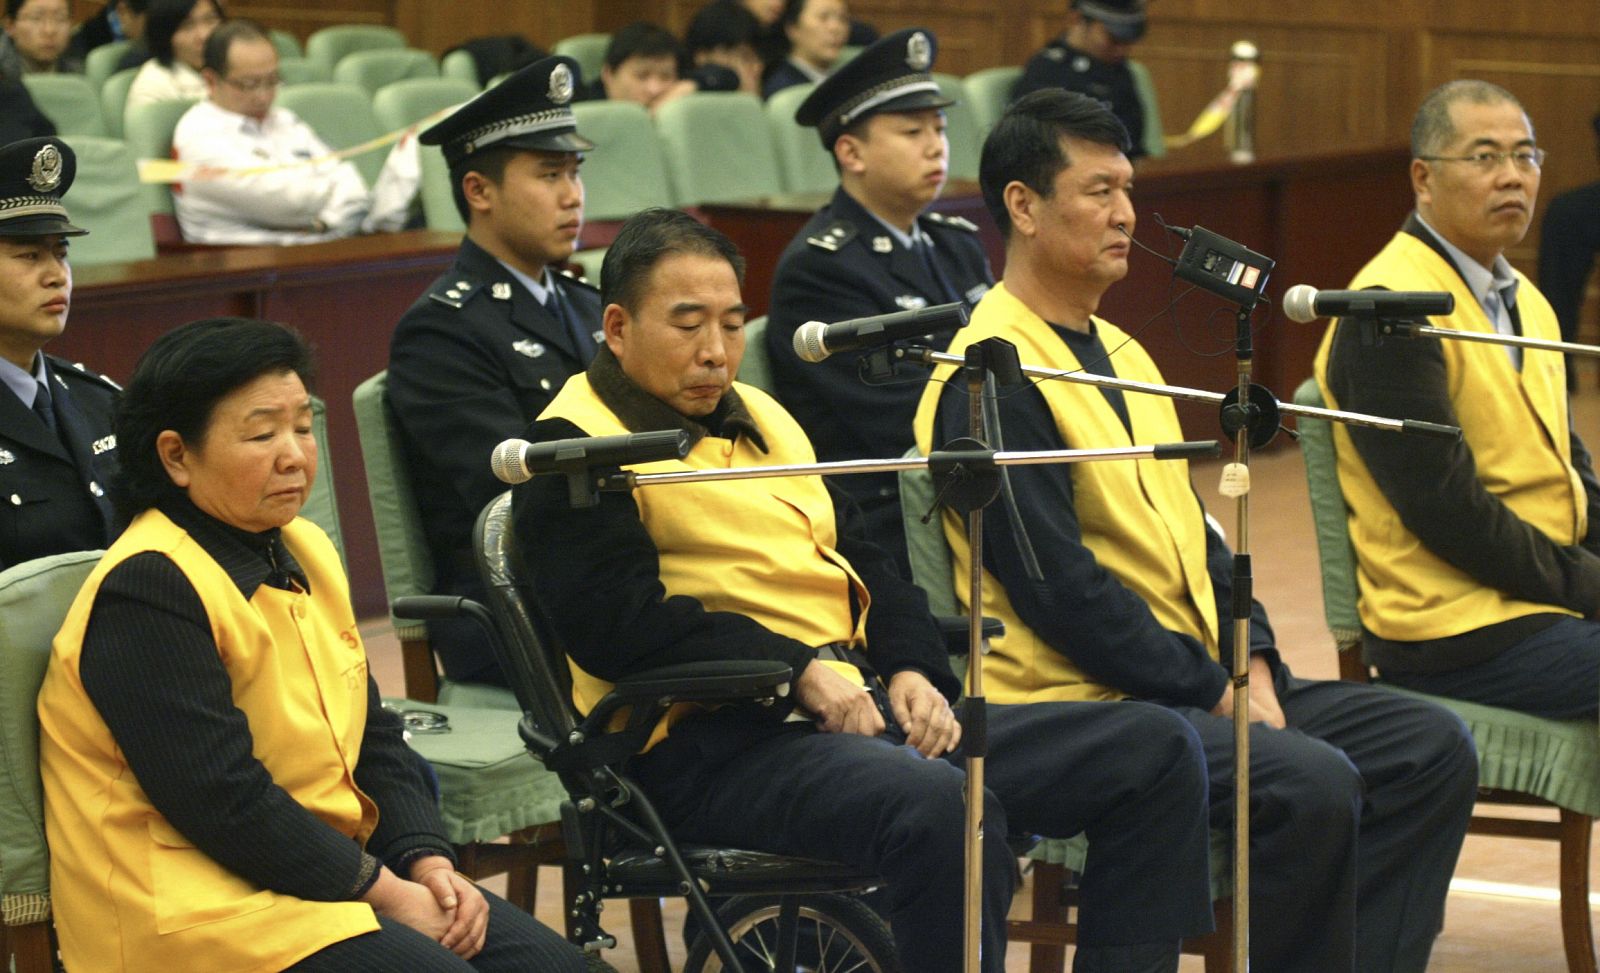 Four former executives of Sanlu Group stand on trial at Shijiazhuang Intermediate People's Court